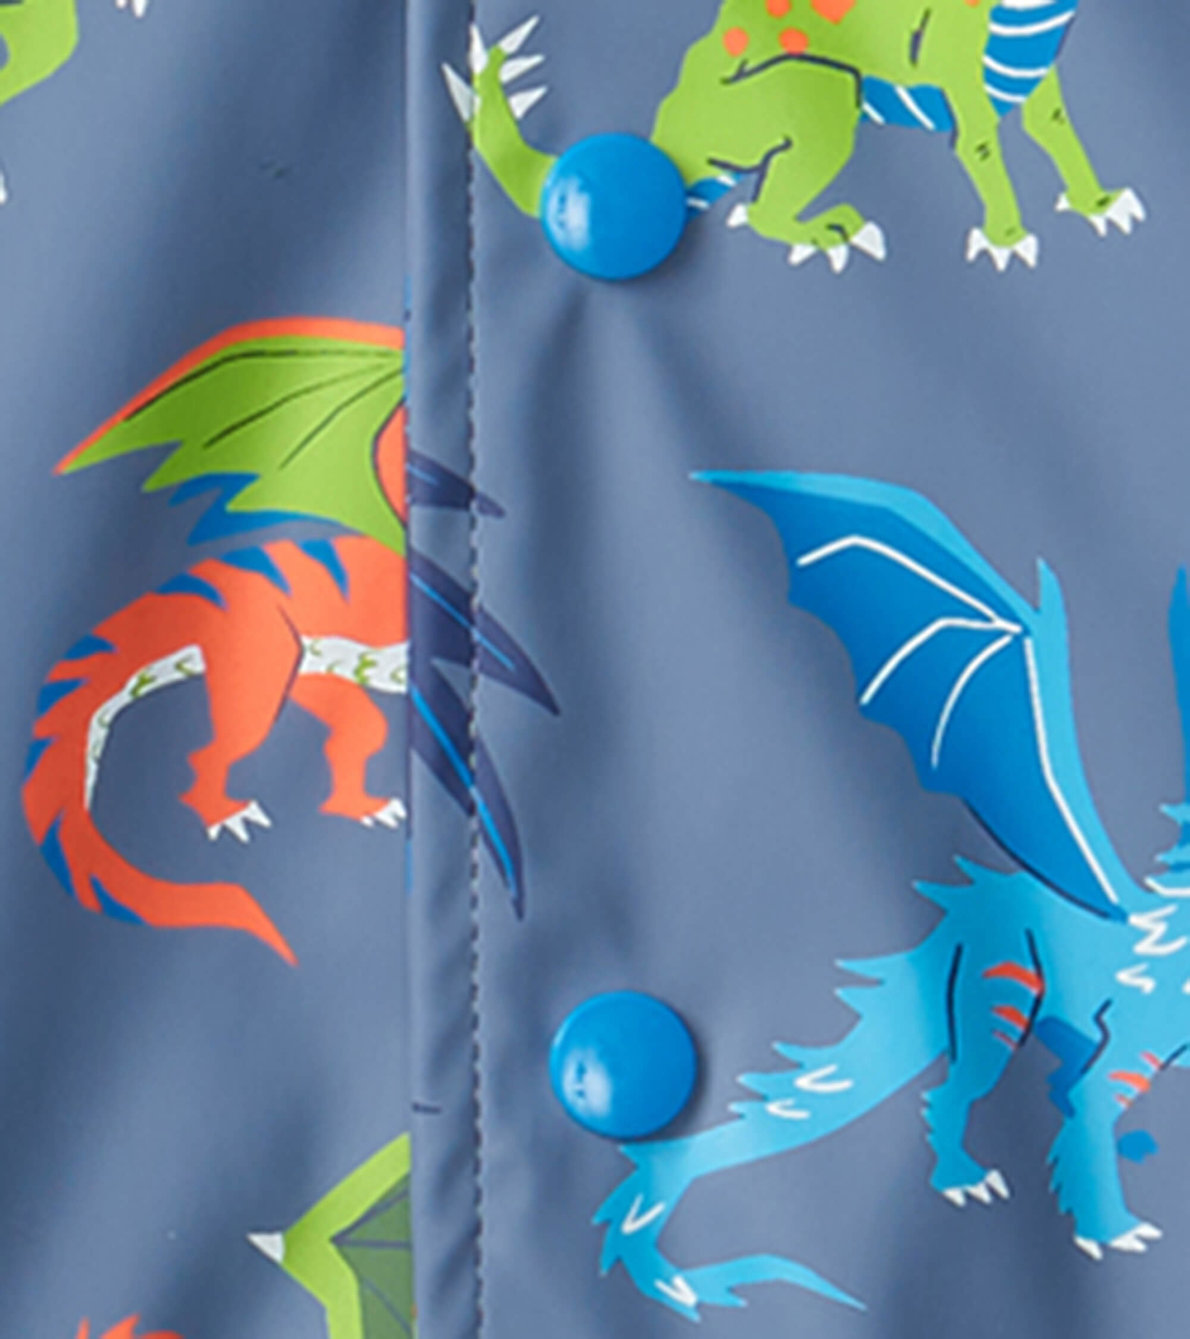 View larger image of Boys Dragon Realm Button-Up Rain Jacket